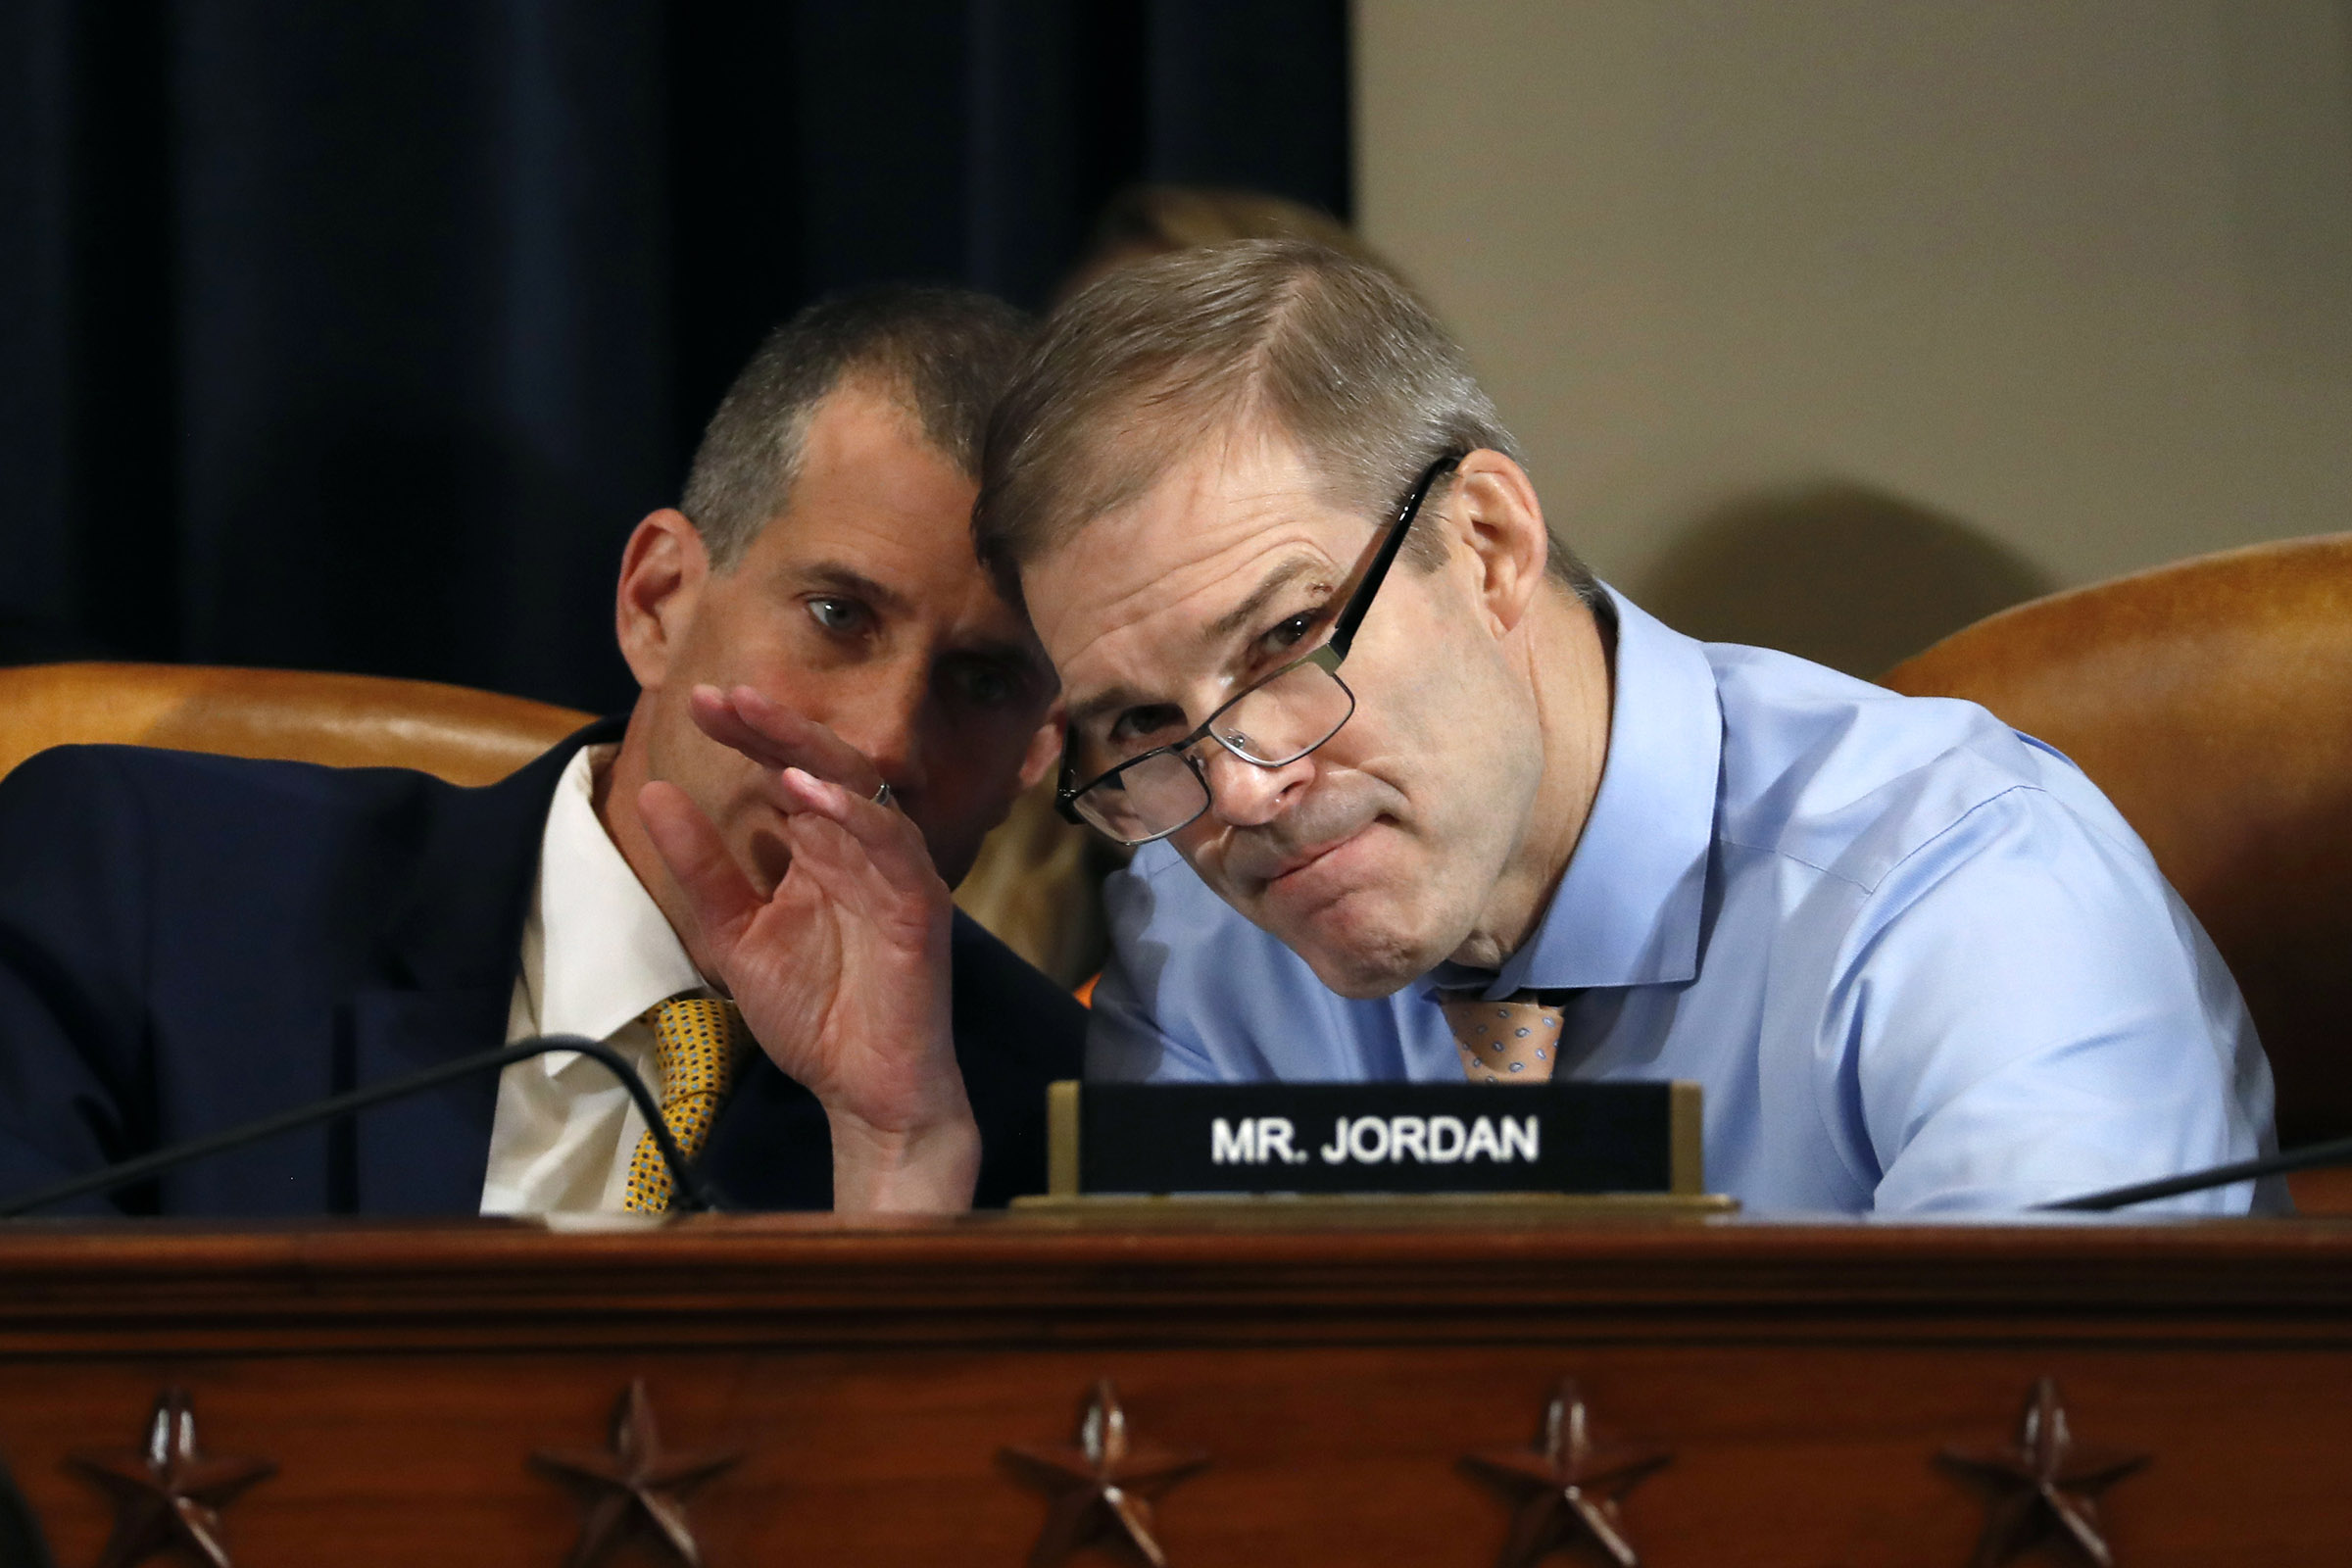 Rep. Jim Jordan (R-OH) (R) and minority counsel Steve Castor confer during a hearing before the House Intelligence Committee on Capitol Hill in Washington D.C. on Nov. 19, 2019. (Jacquelyn Martin—Getty Images)